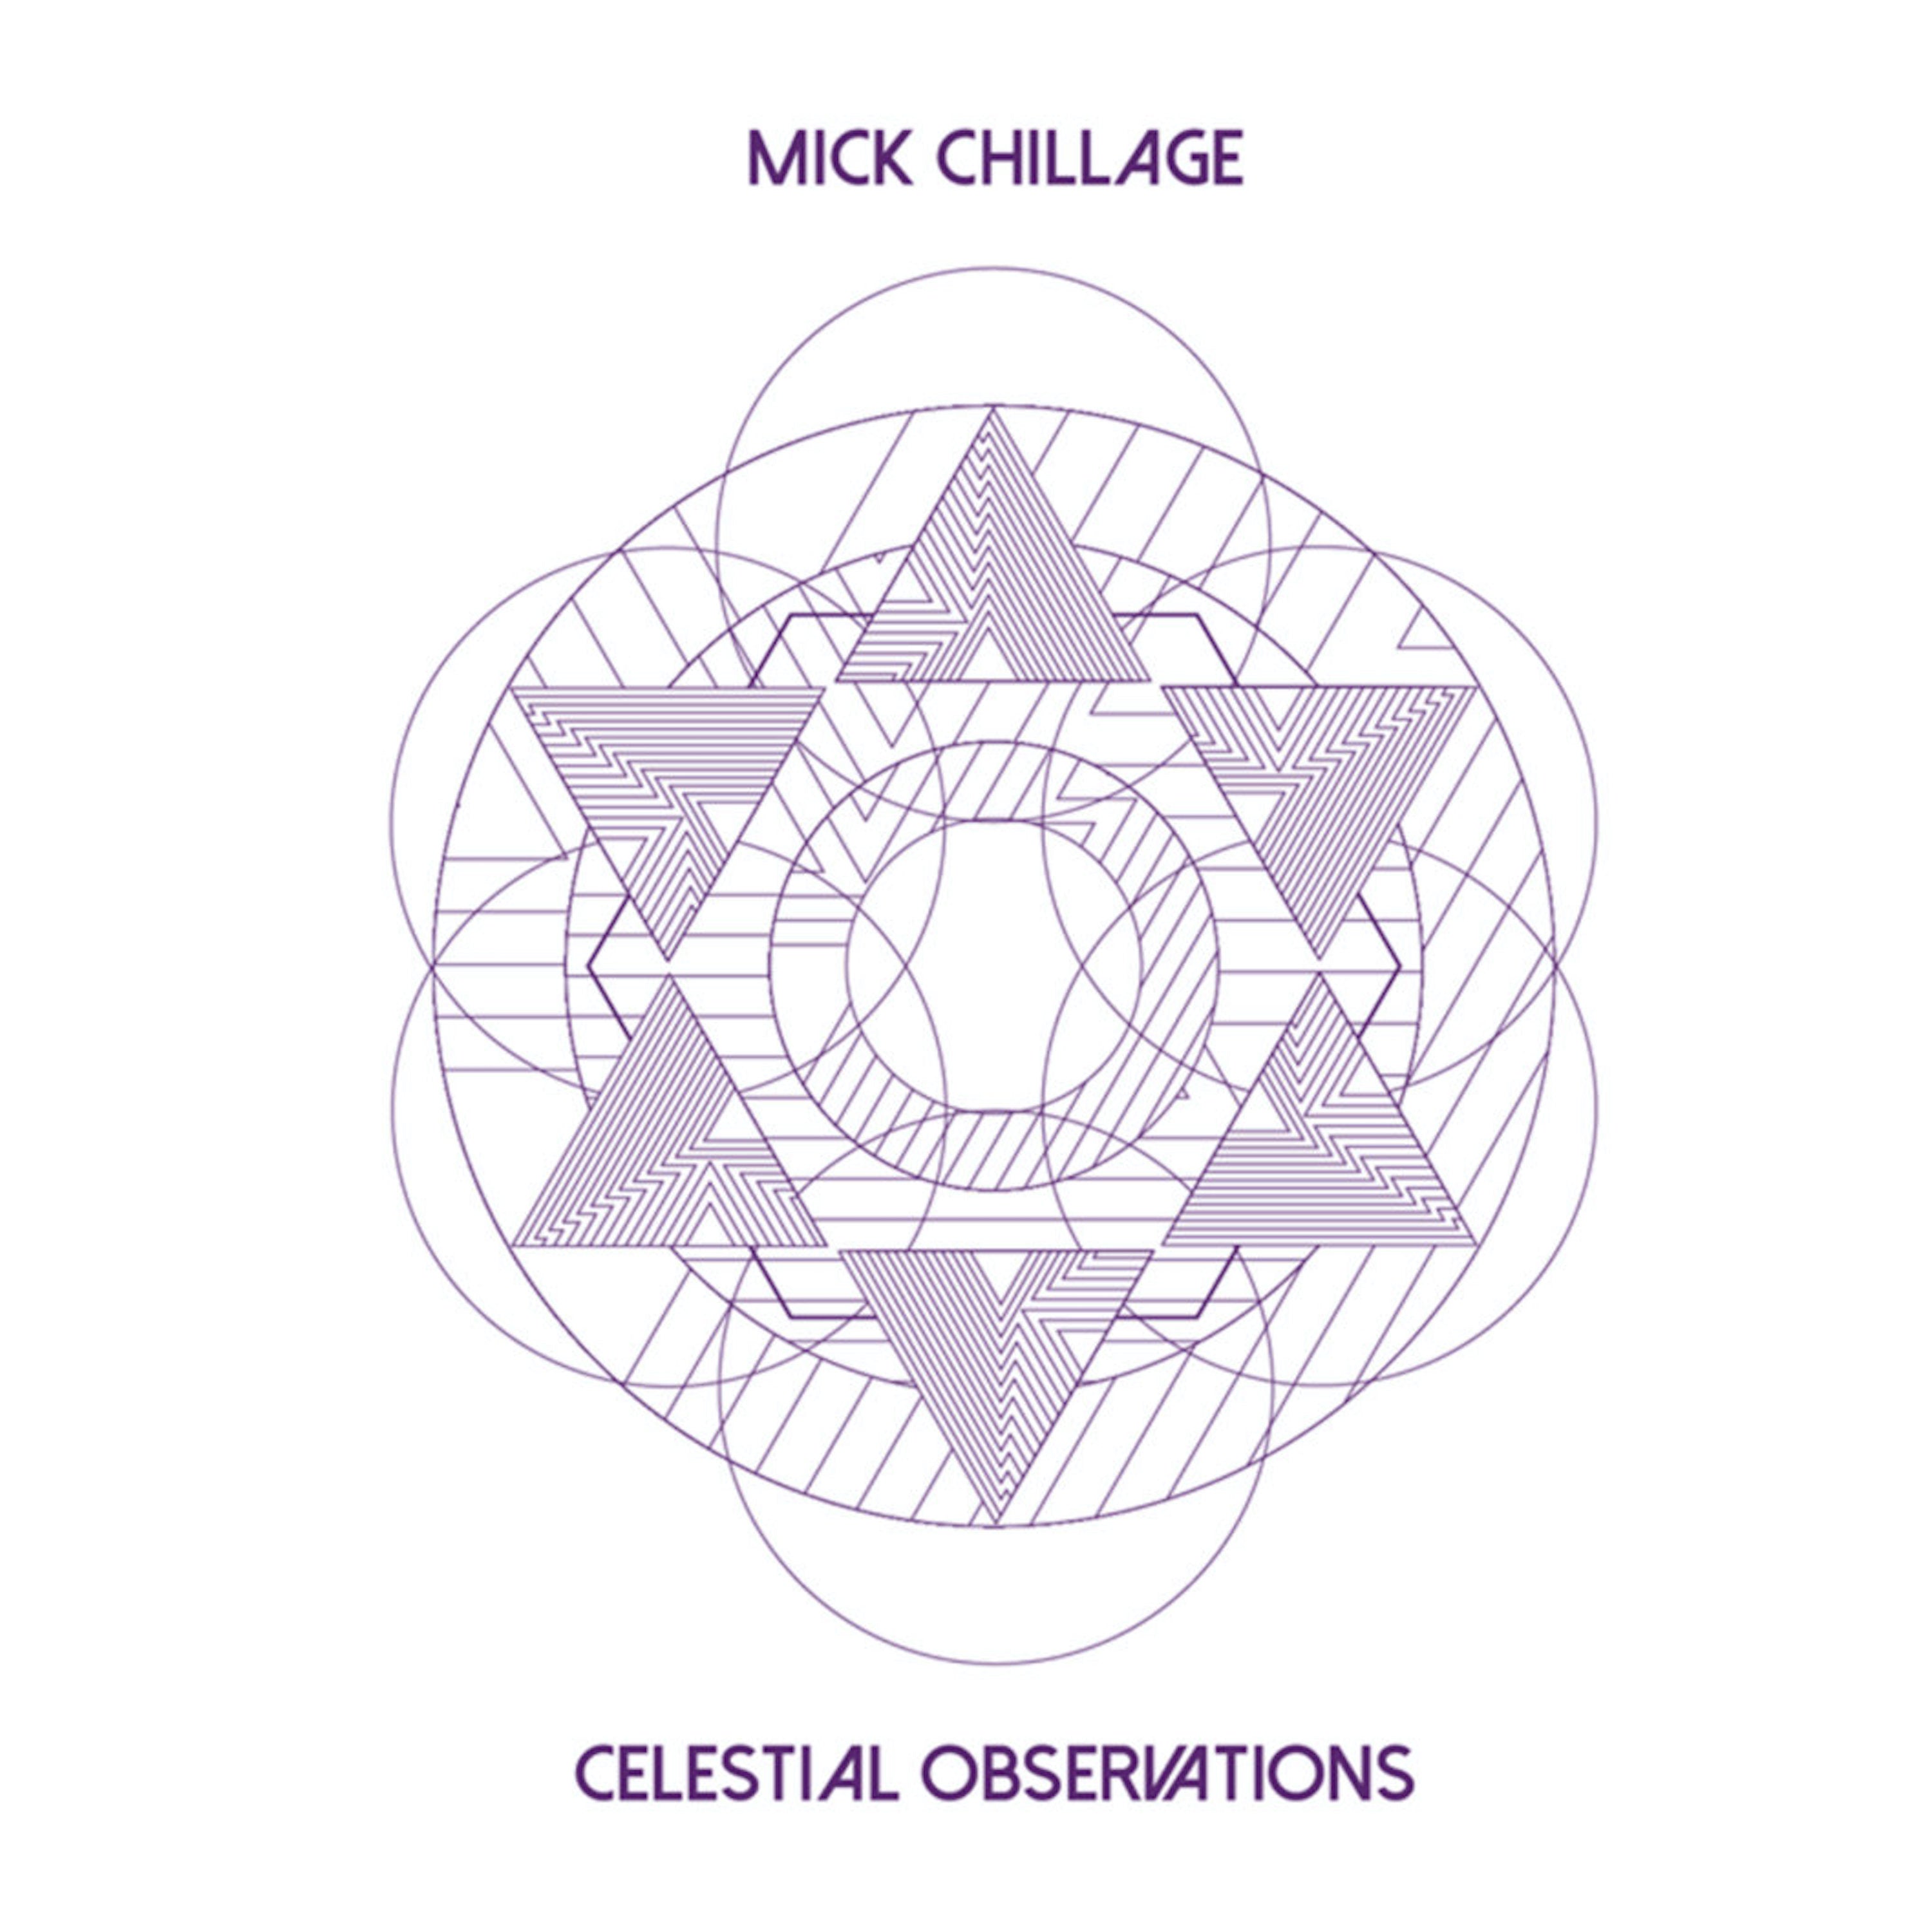 Mick Chillage - Celestial Observations